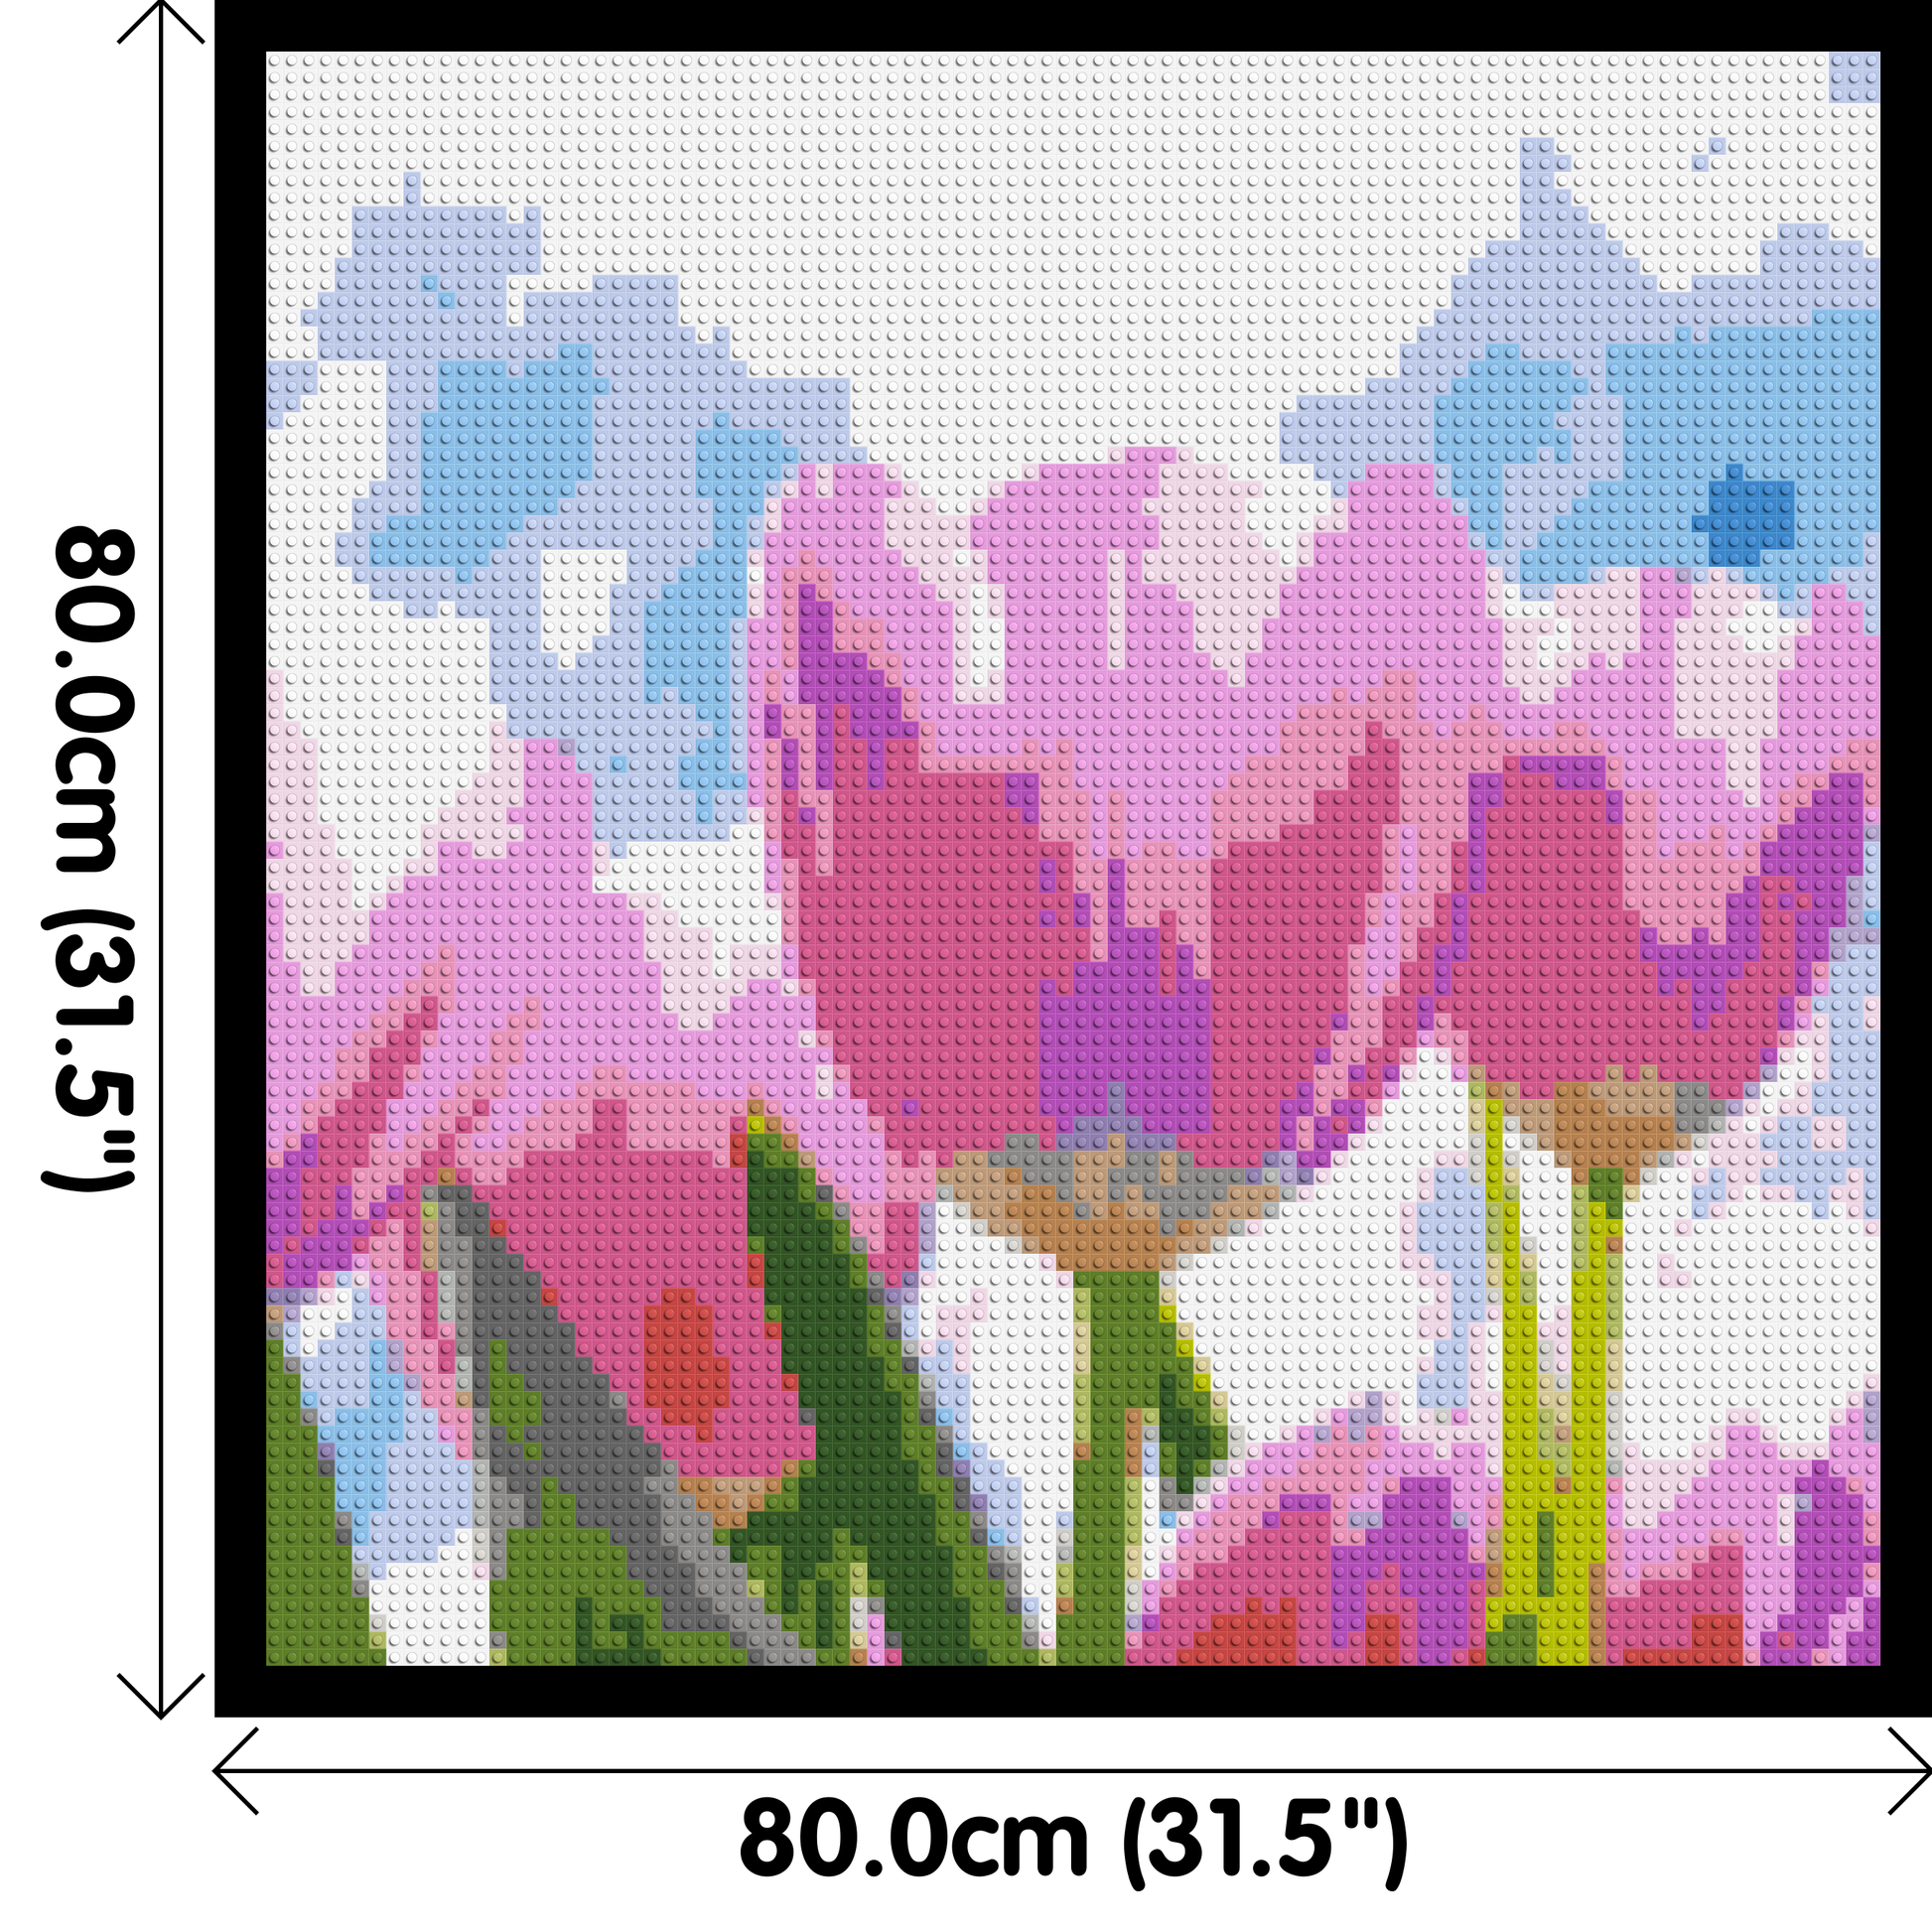 Pink Tulips - Brick Art Mosaic Kit 4x4 dimensions with frame